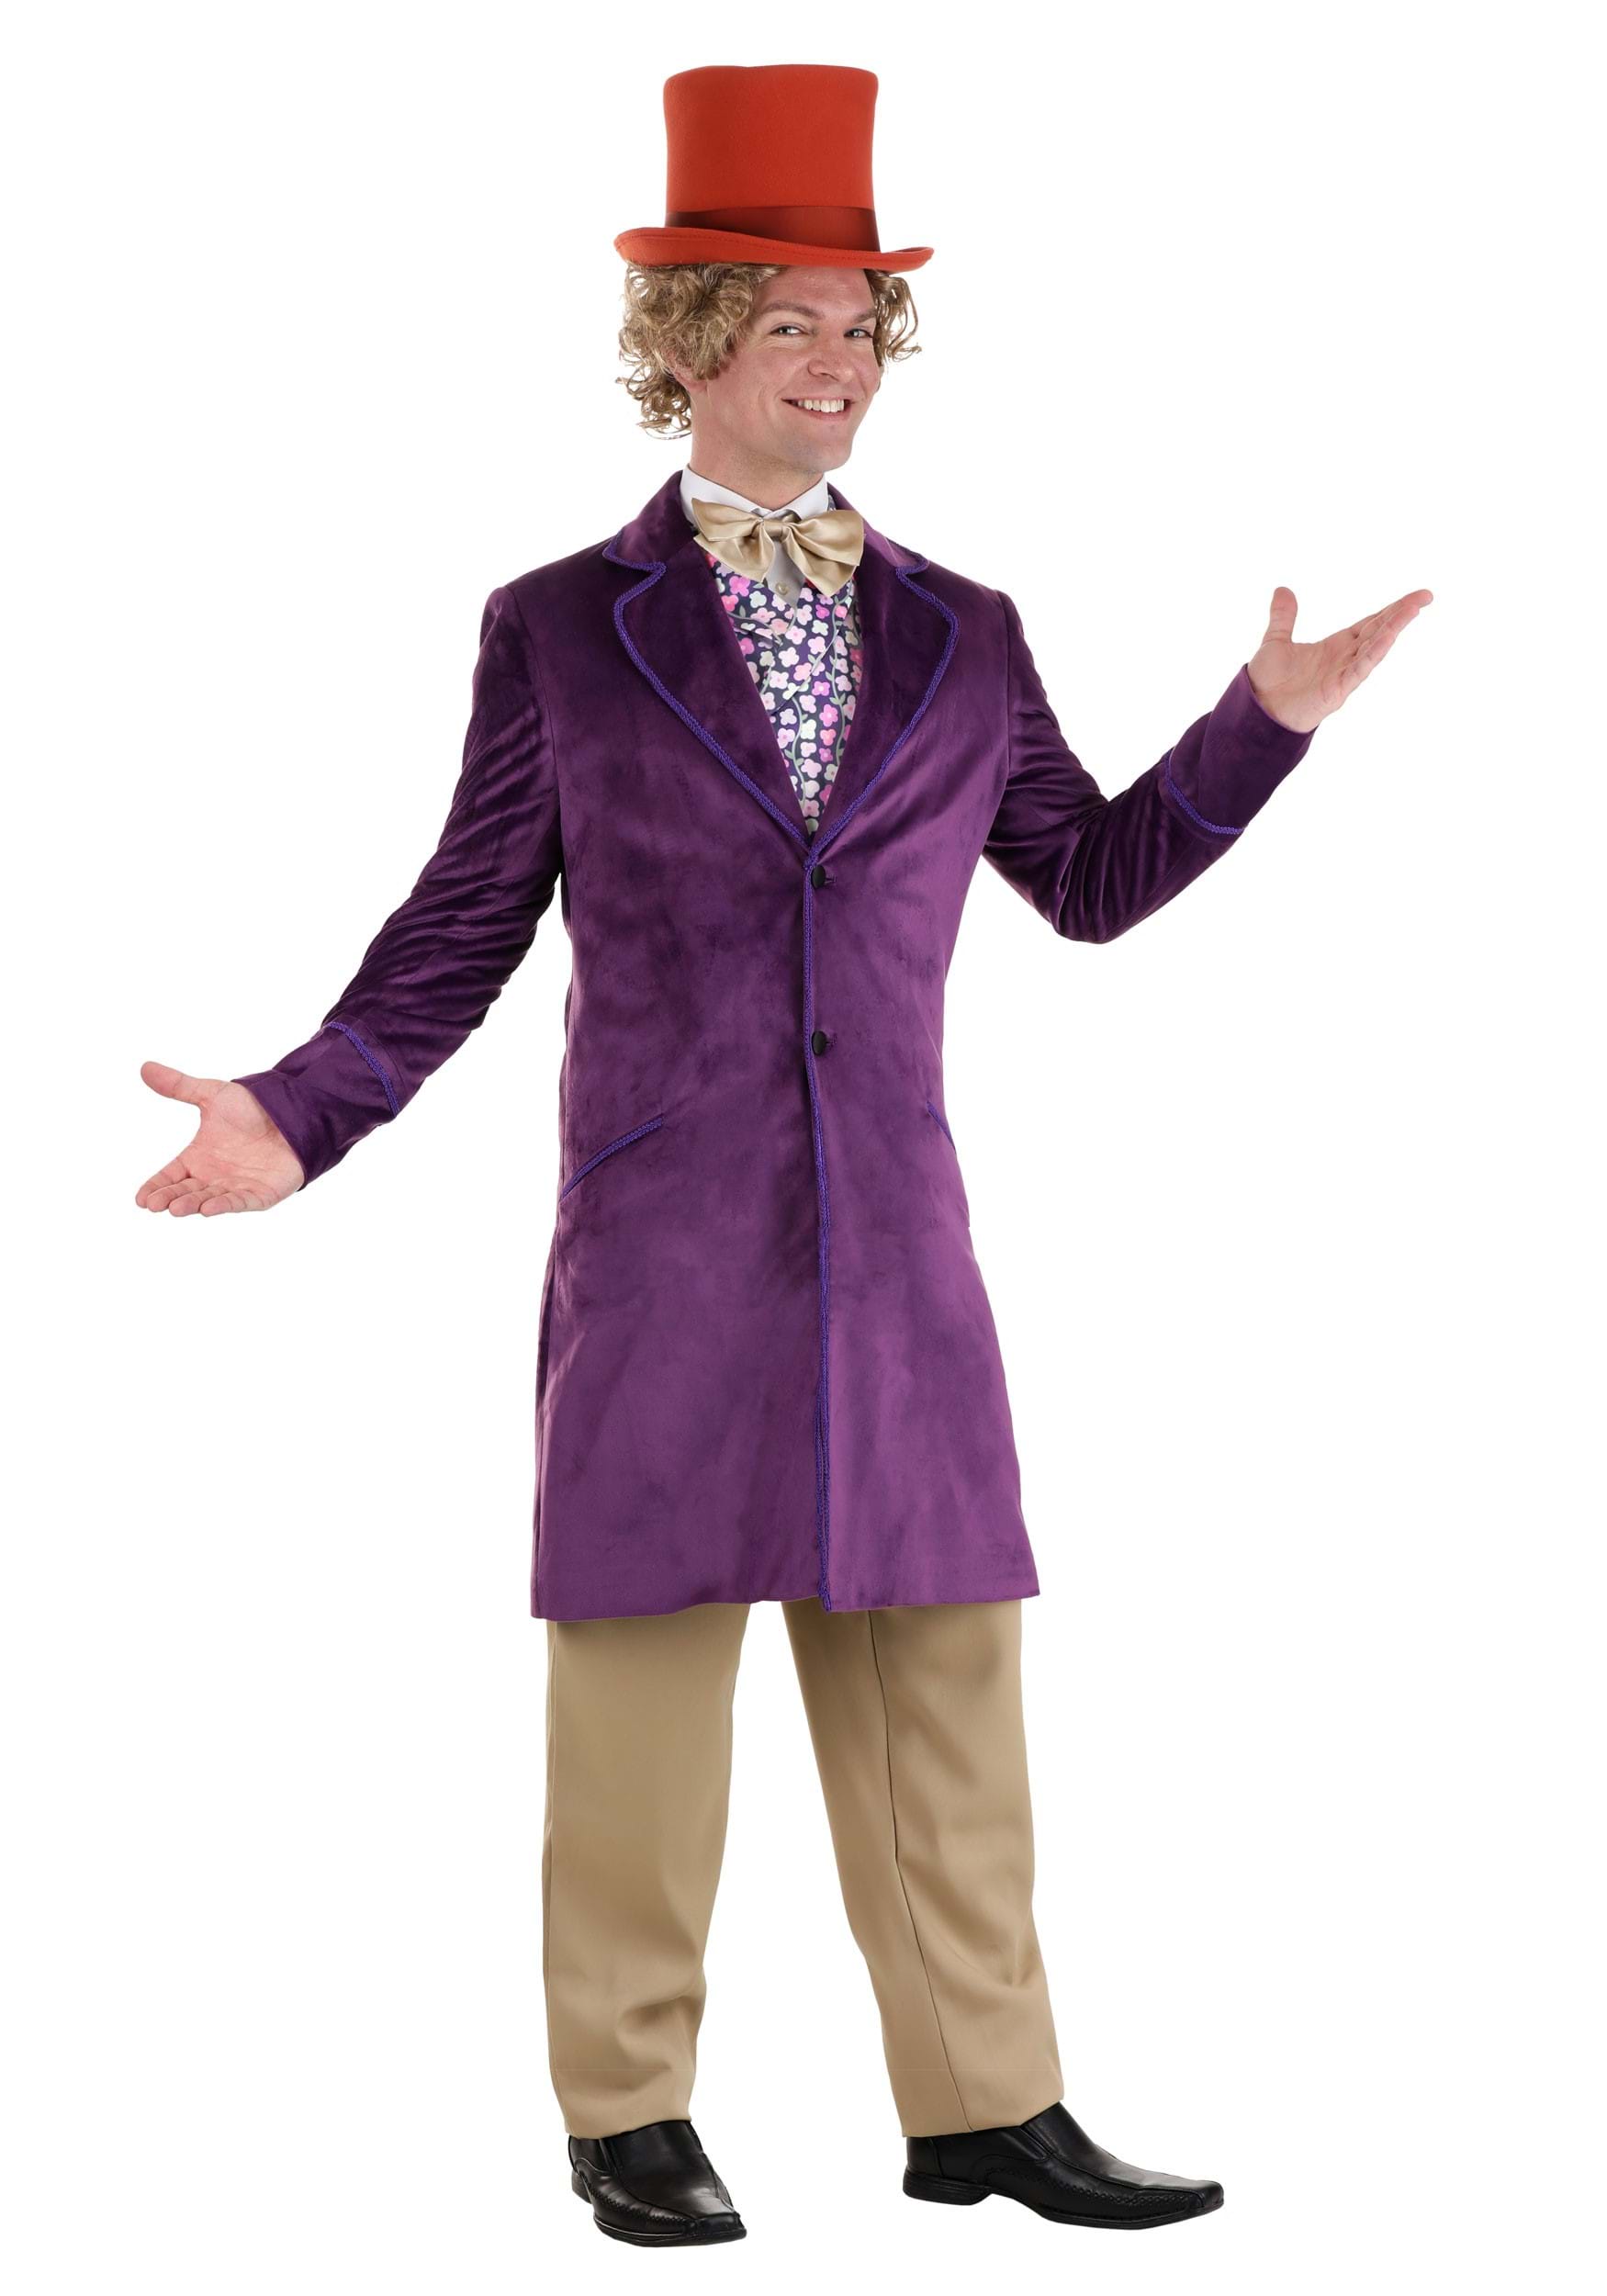 Authentic Willy Wonka Costume Jacket For Men , Willy Wonka Costumes